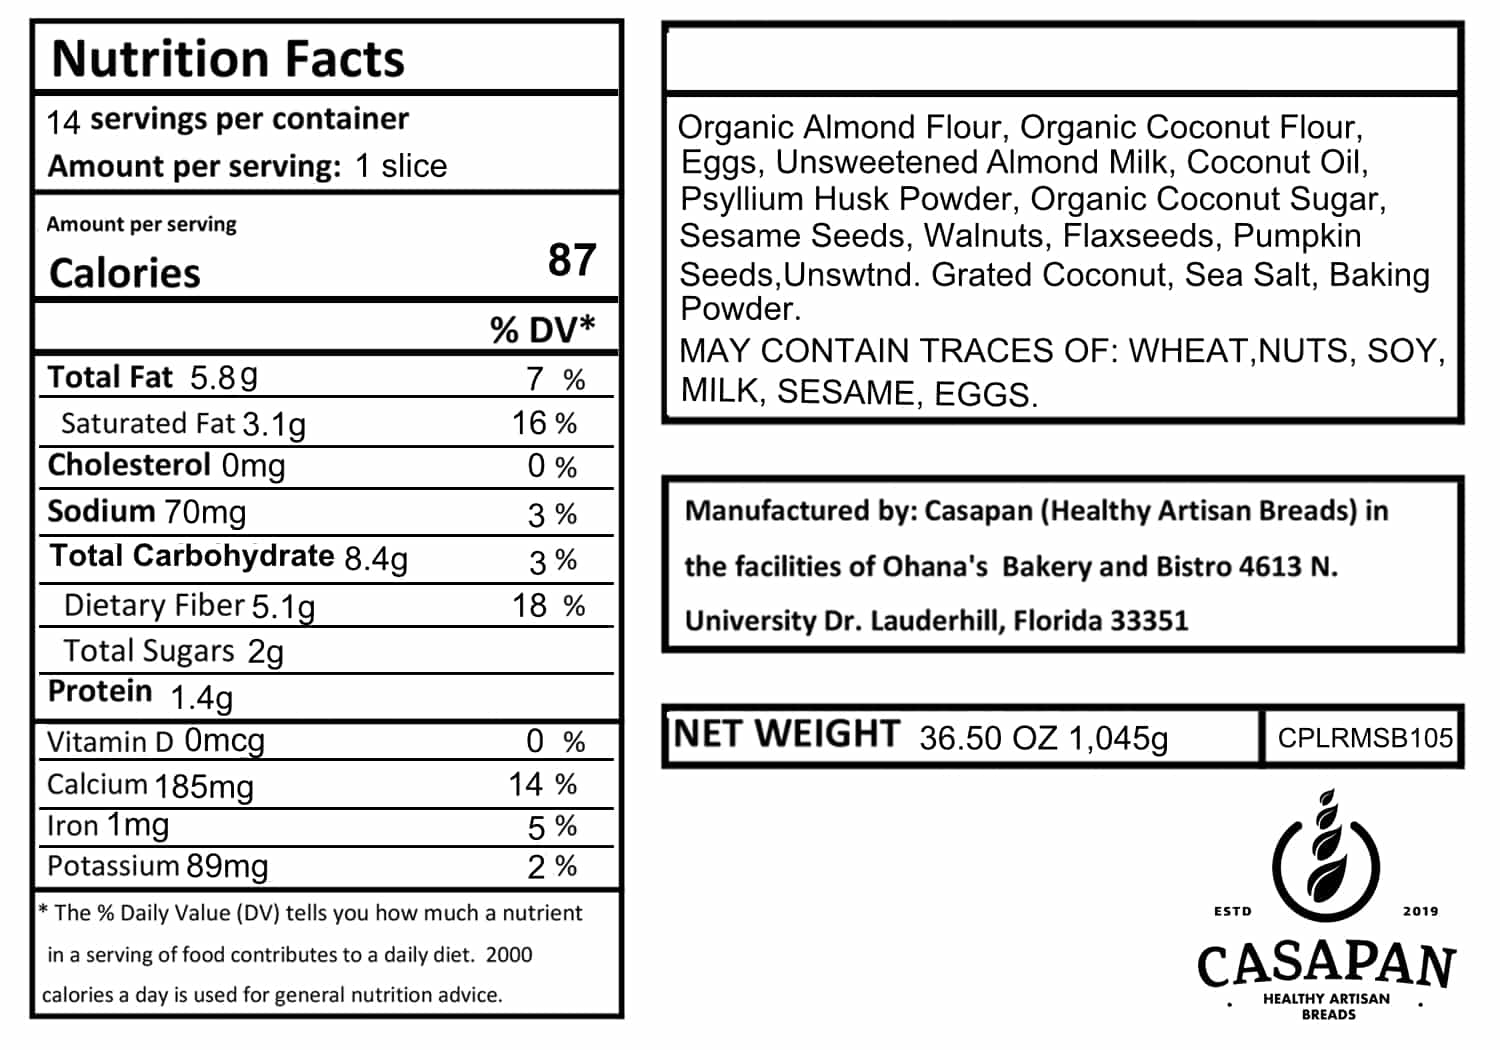 CPLRMSB105 REGULAR MULTISEEDS LARGE BREAD NUTRITION–FACTS